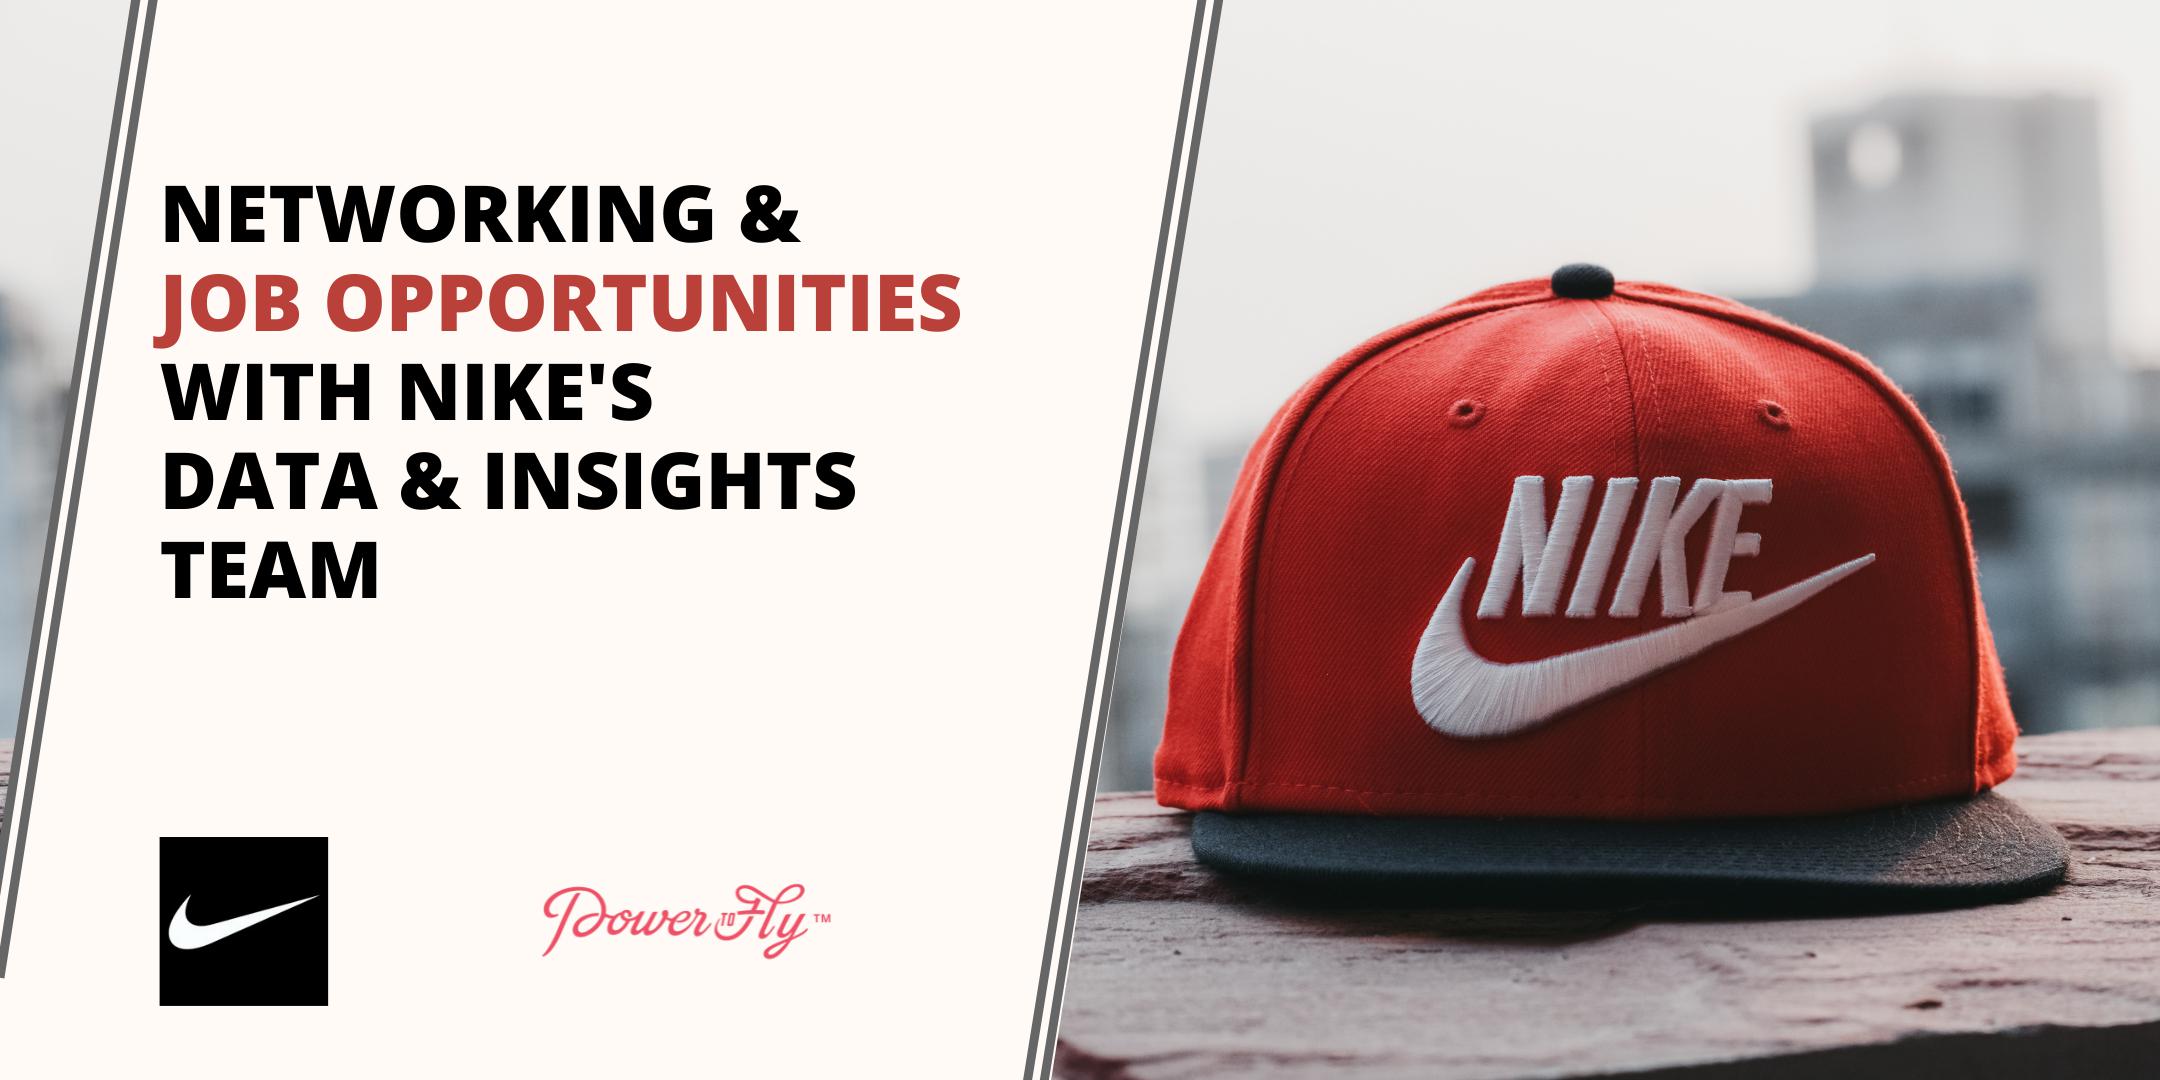 Martin Luther King Junior raíz añadir Networking & Job Opportunities with Nike's Data & Insights Team